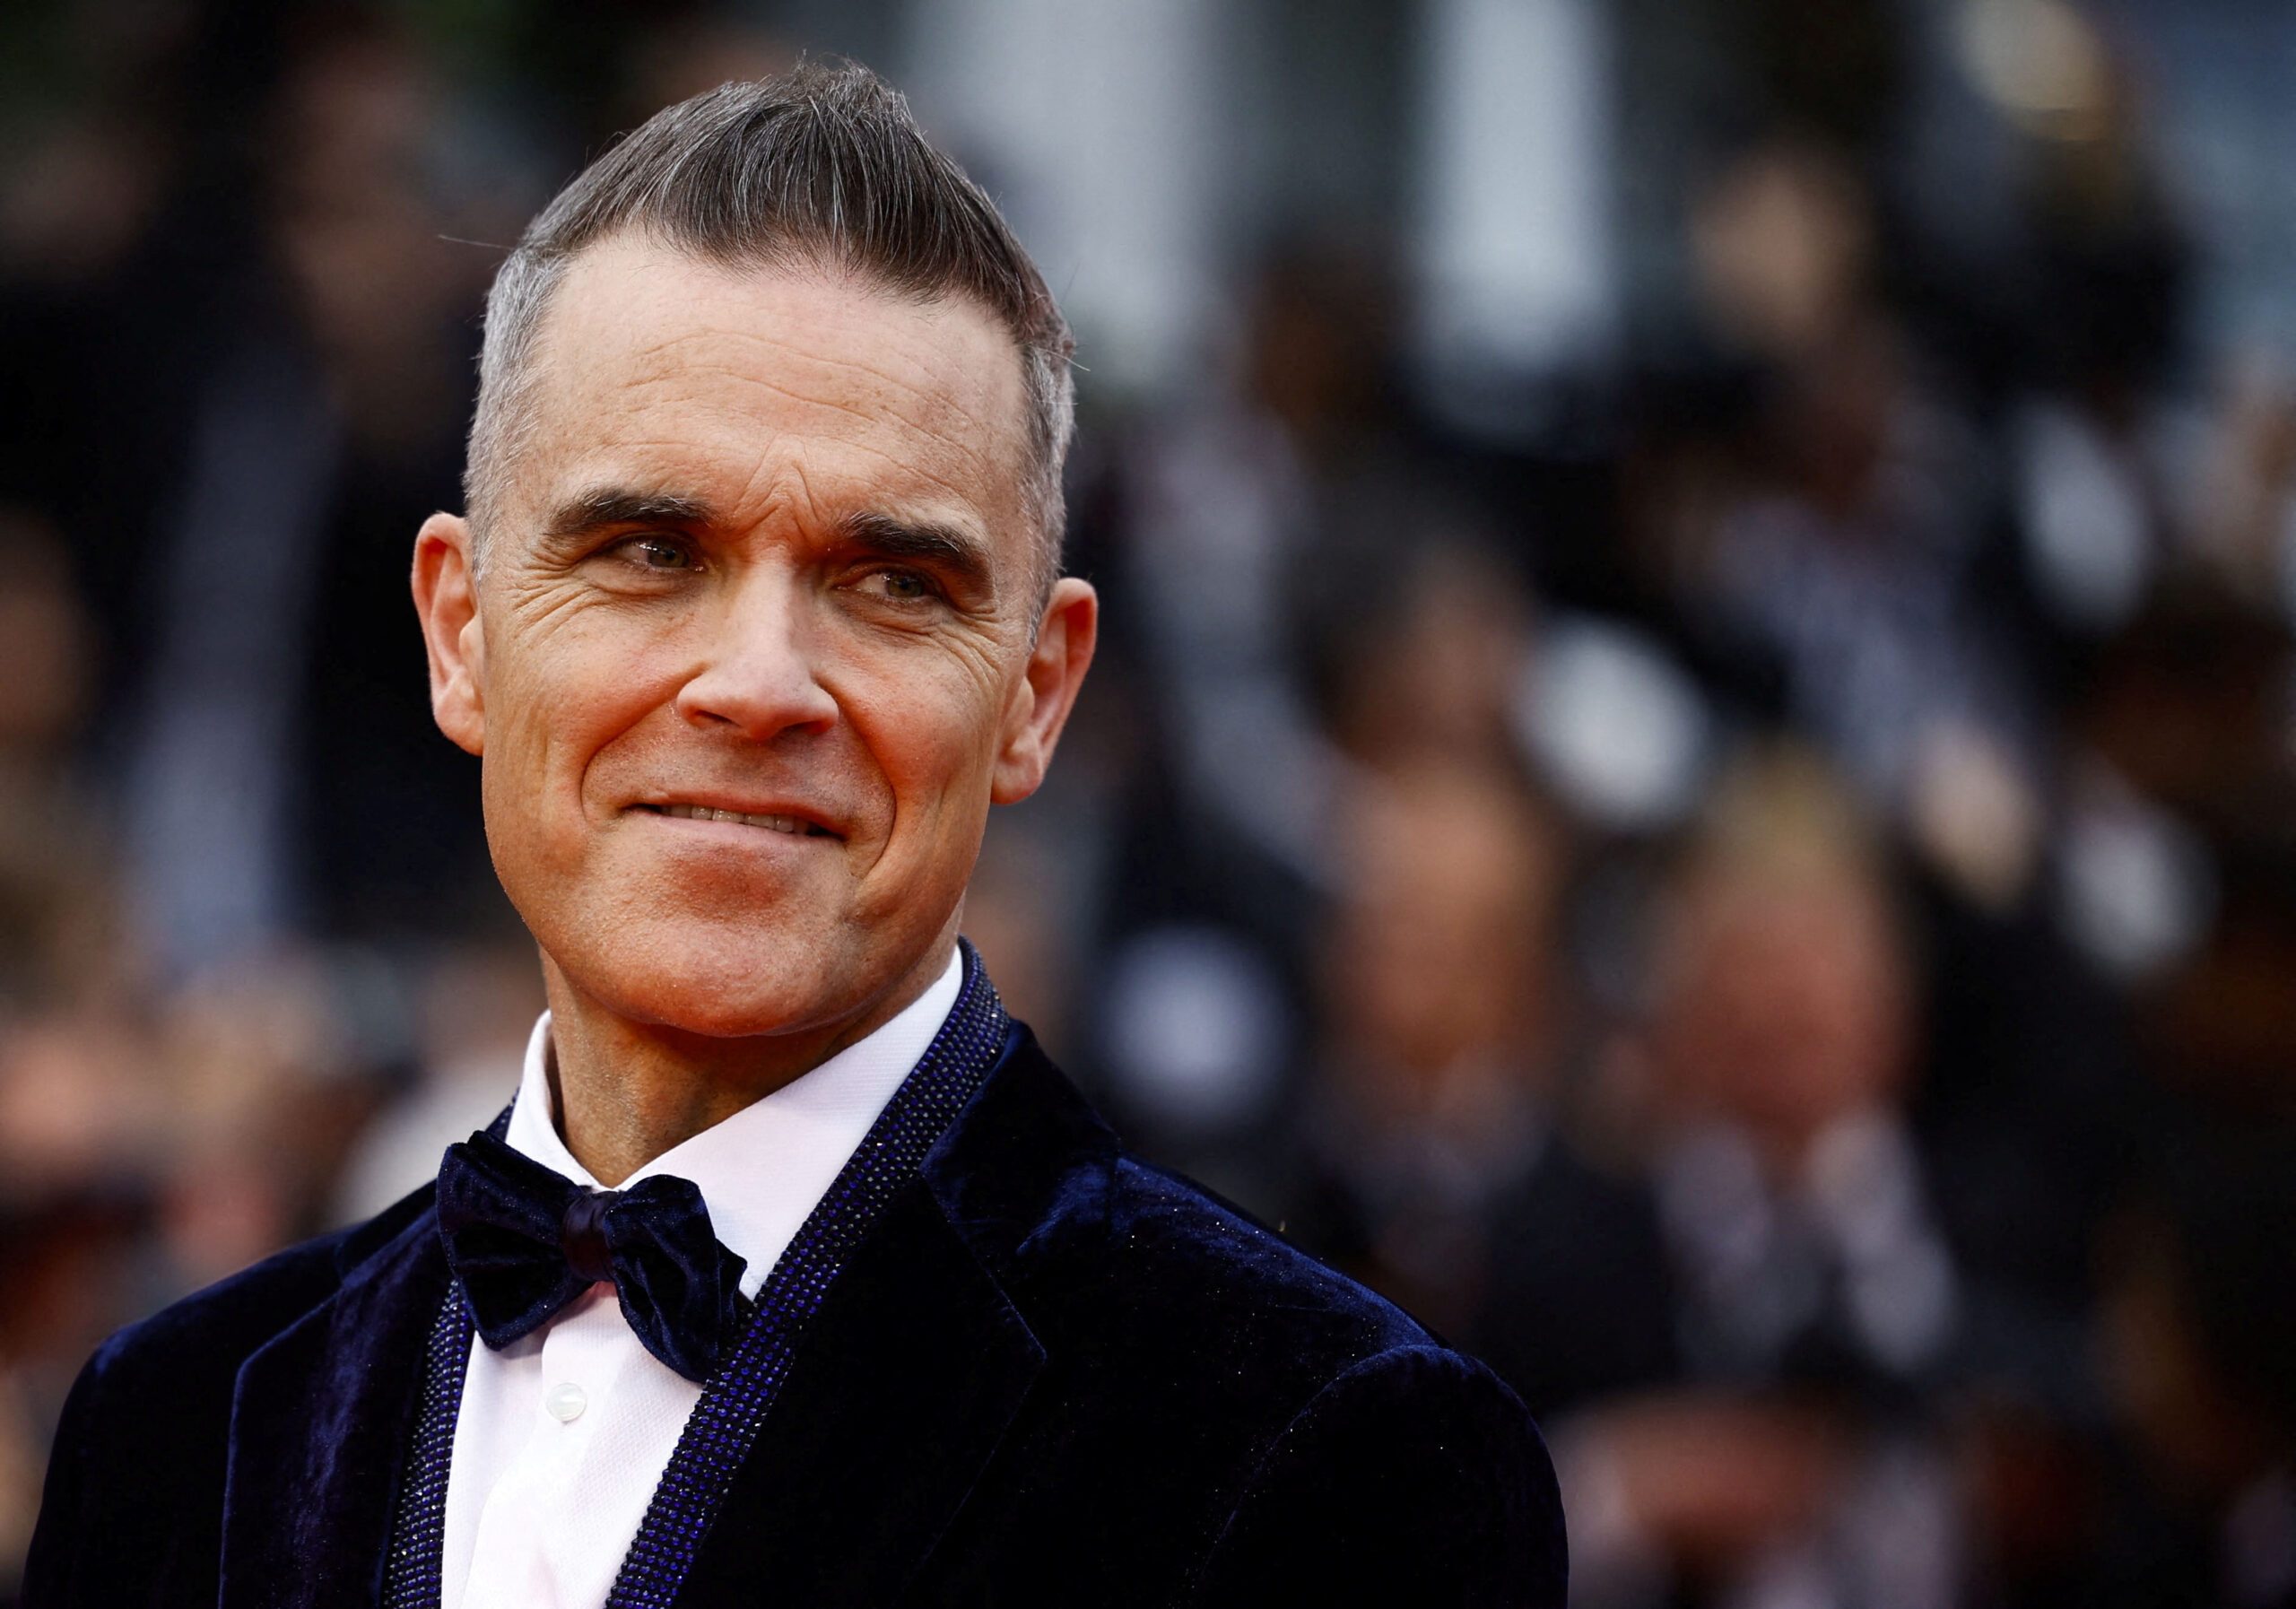 Robbie Williams relives his highs and lows in new Netflix show